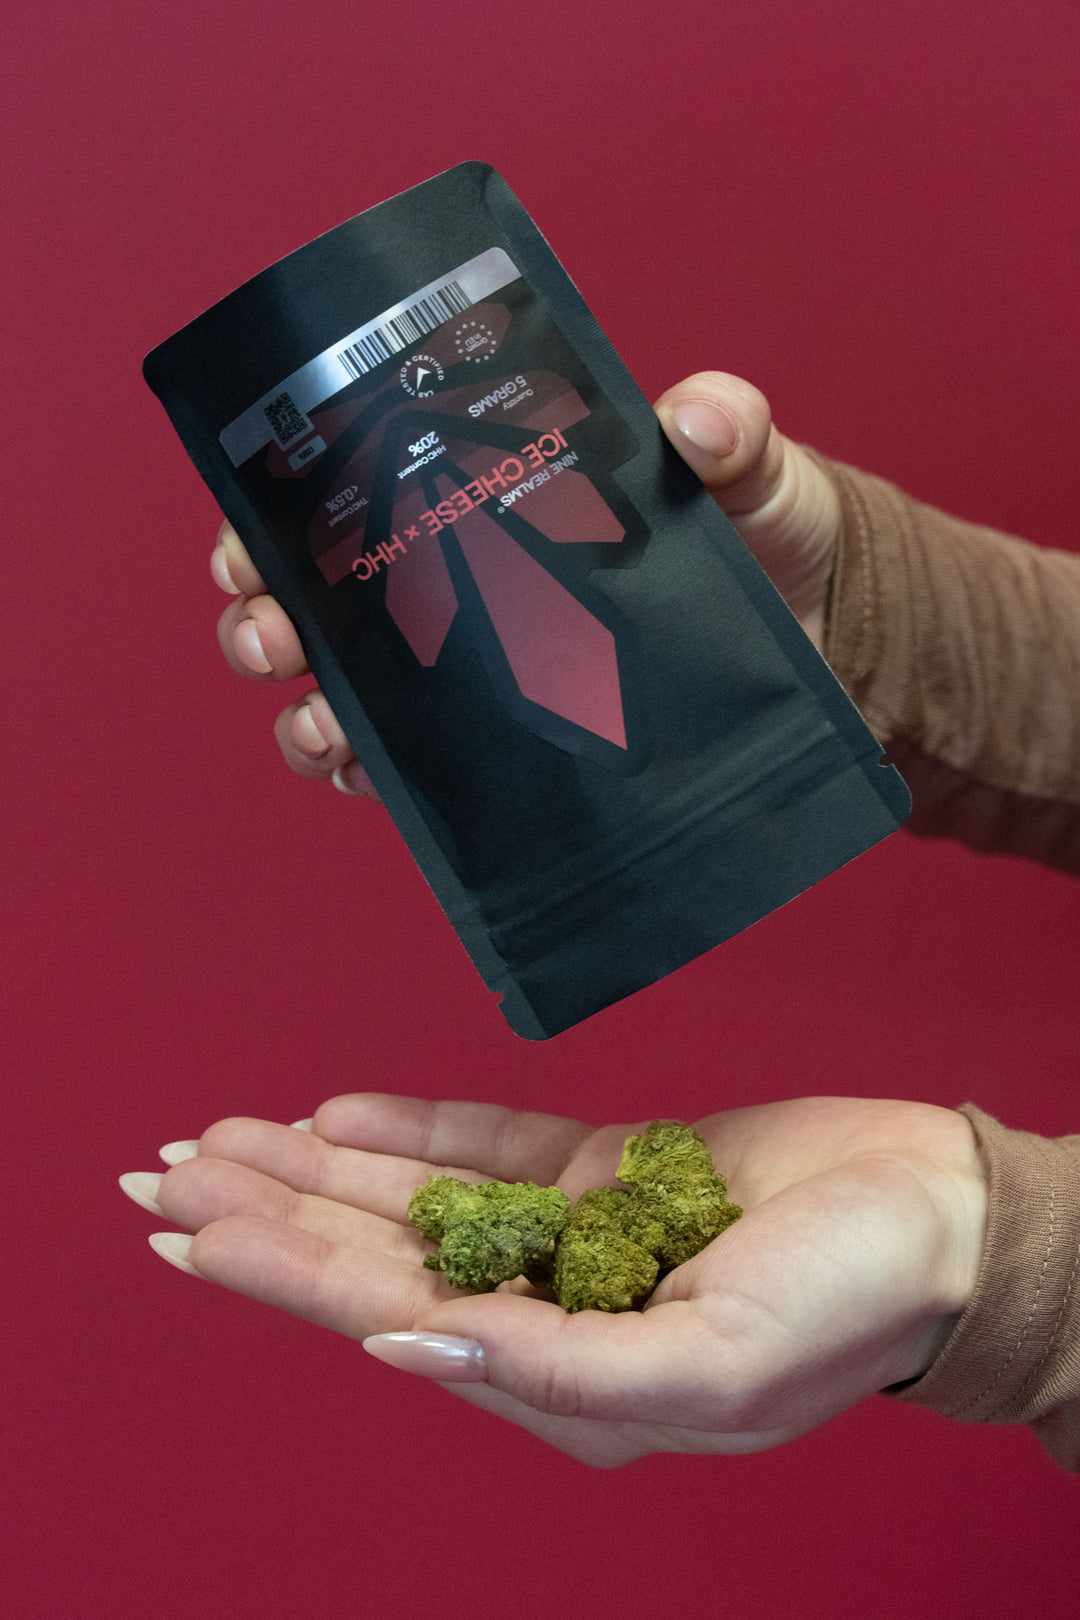 Female holding weed doypack with cannabis flower buds and red background